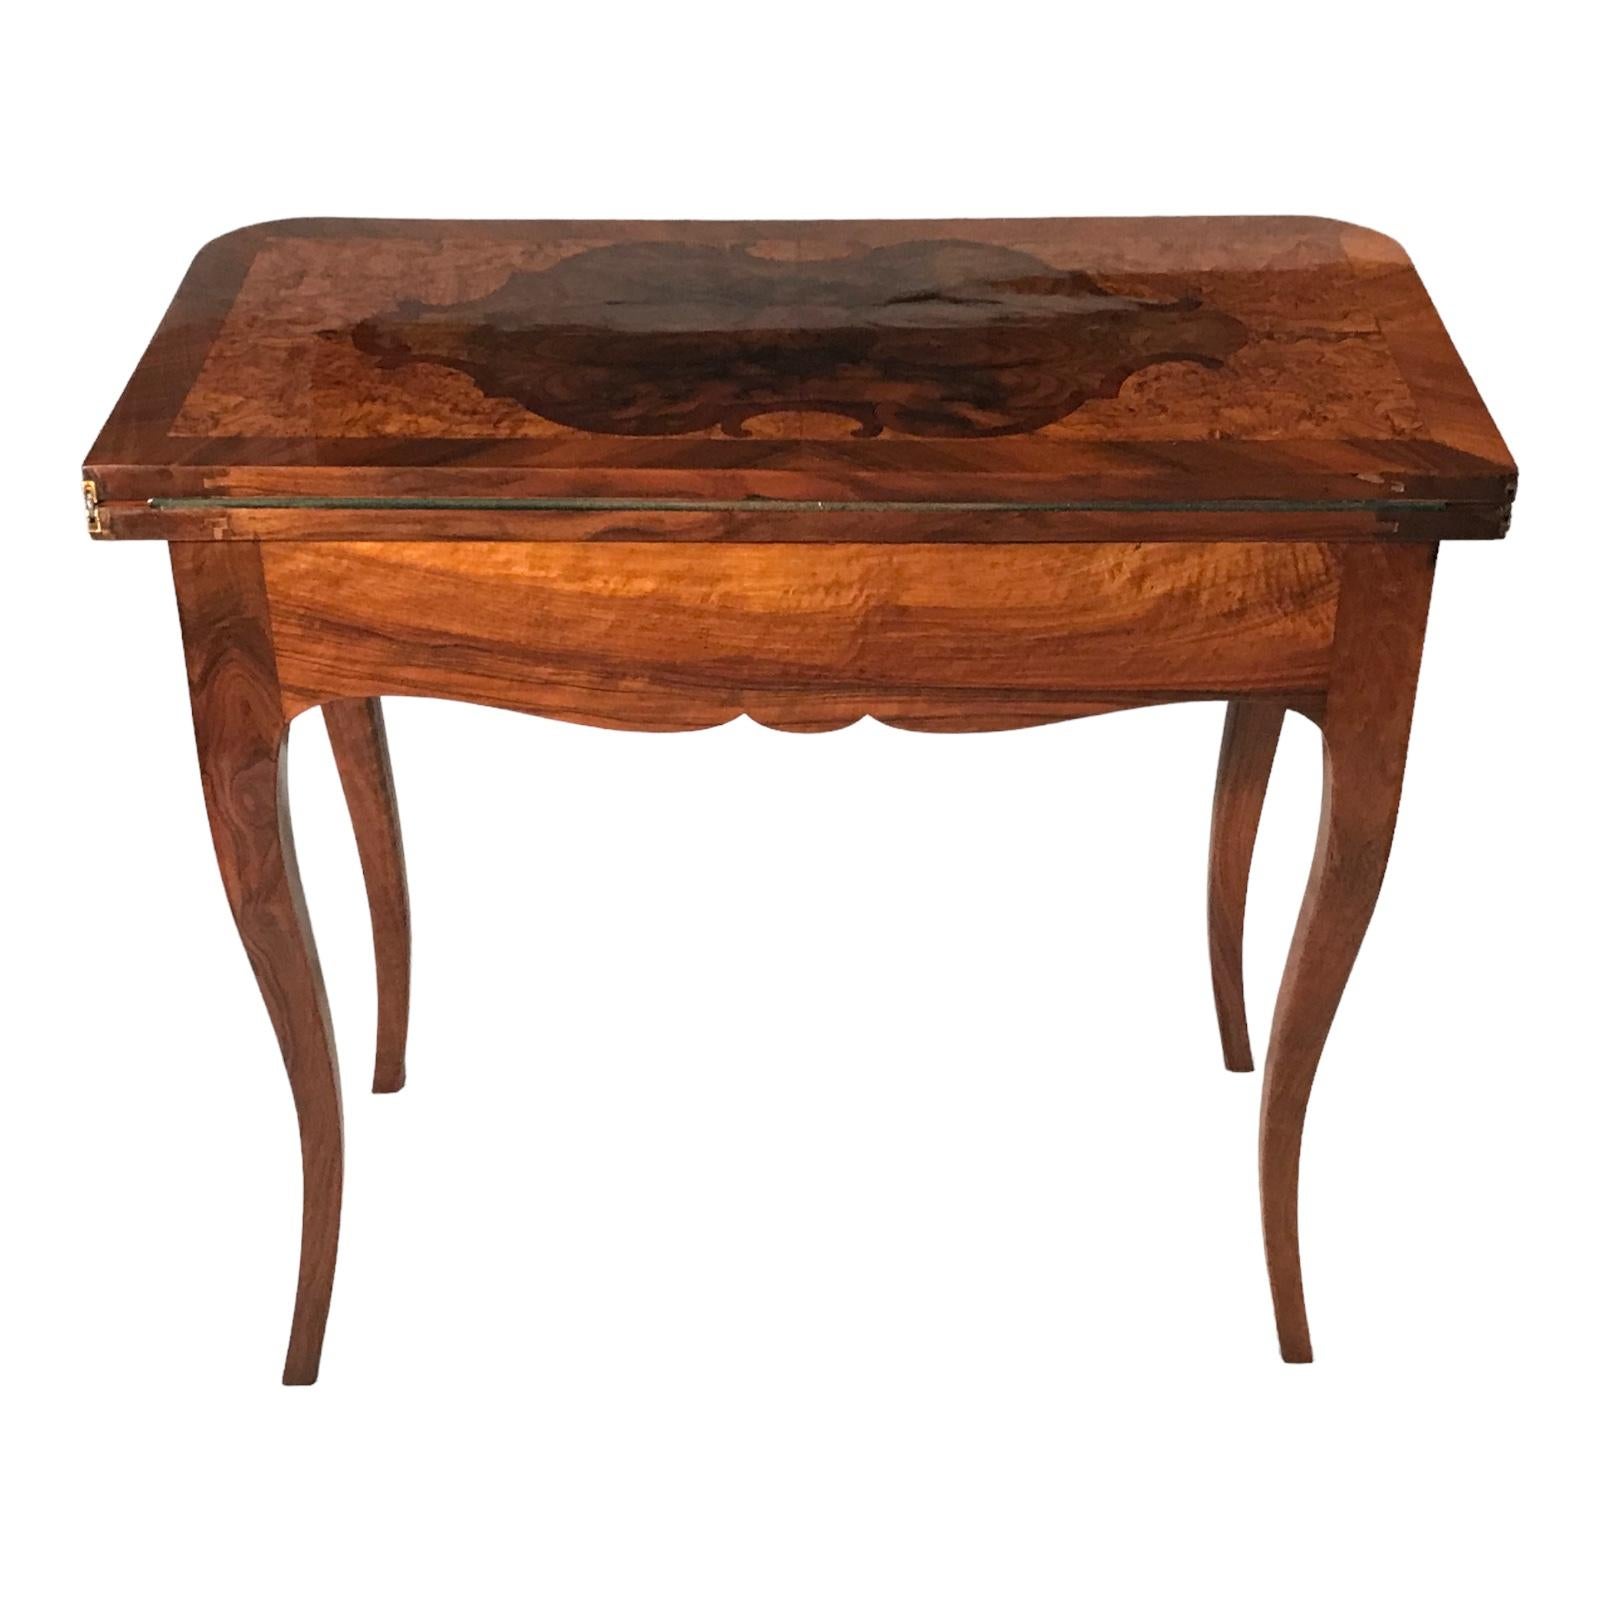 This exceptional Baroque Game Table originates from Southern Germany and dates back to approximately 1770. It showcases a stunning walnut veneer that adds to its visual appeal. The table's top is exquisitely adorned with intricate patterns of maple